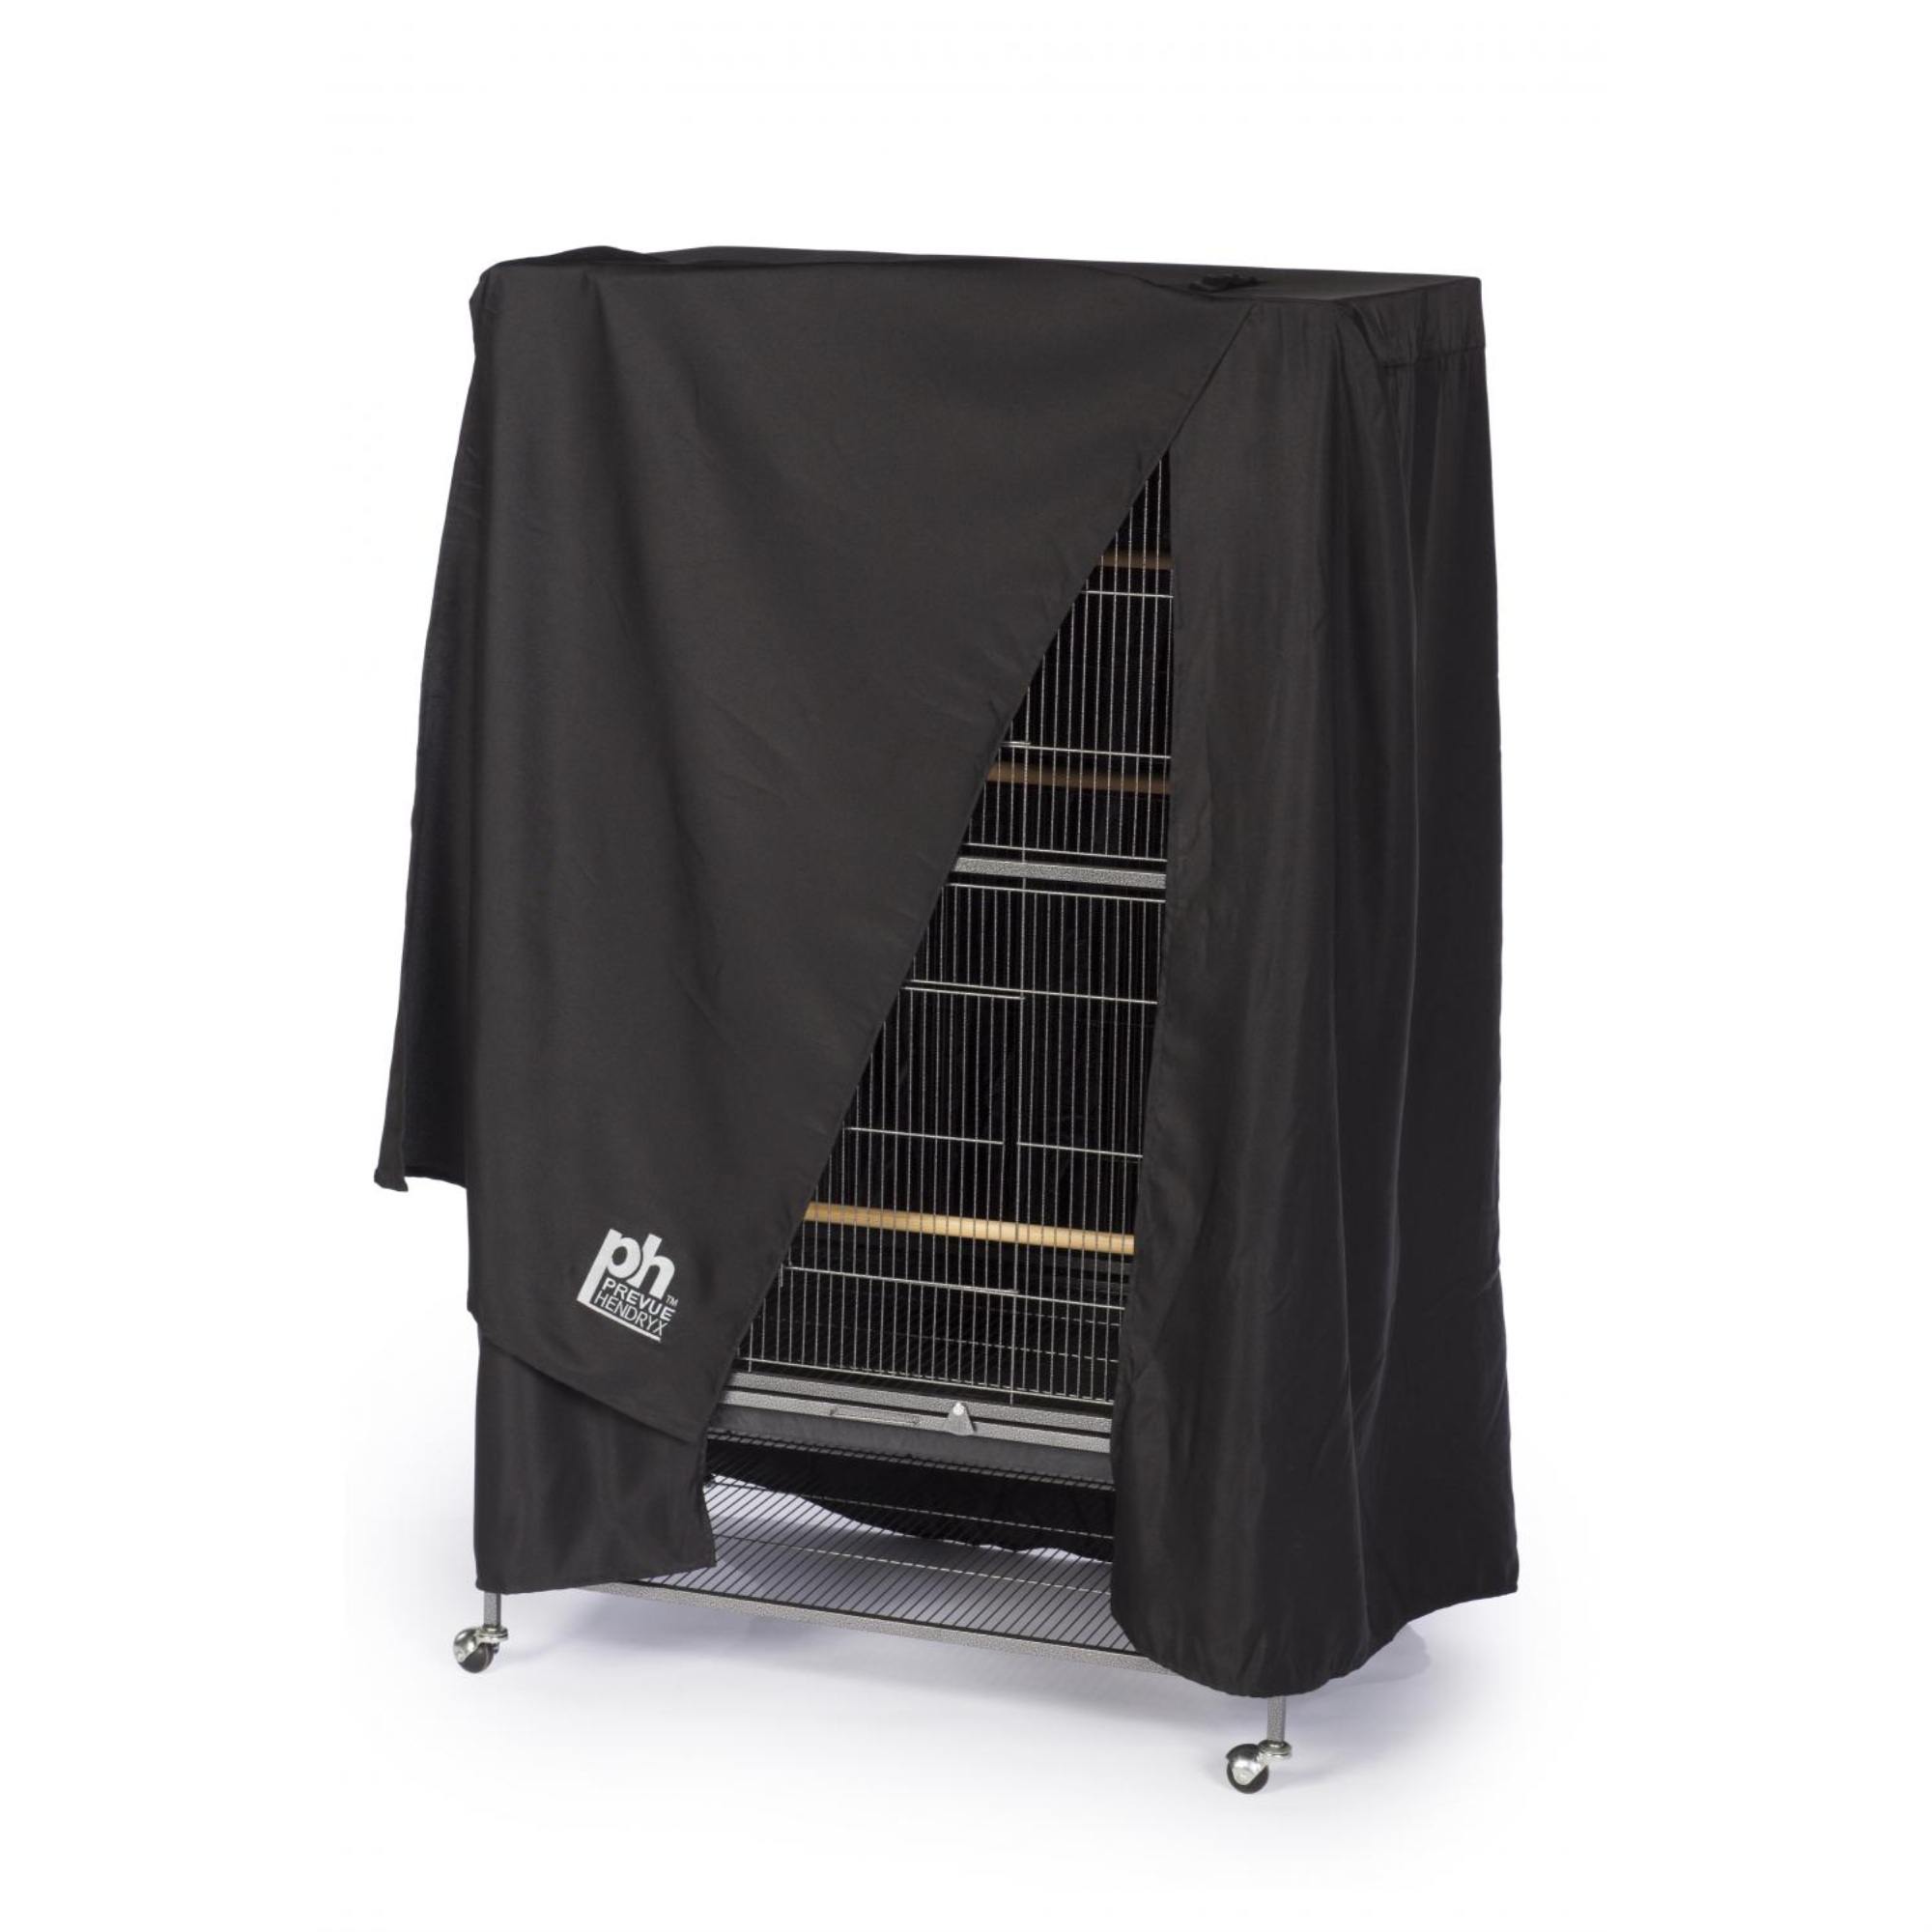 Prevue Pet Products Goodnight Birdcage Cover, Black - image 4 of 4